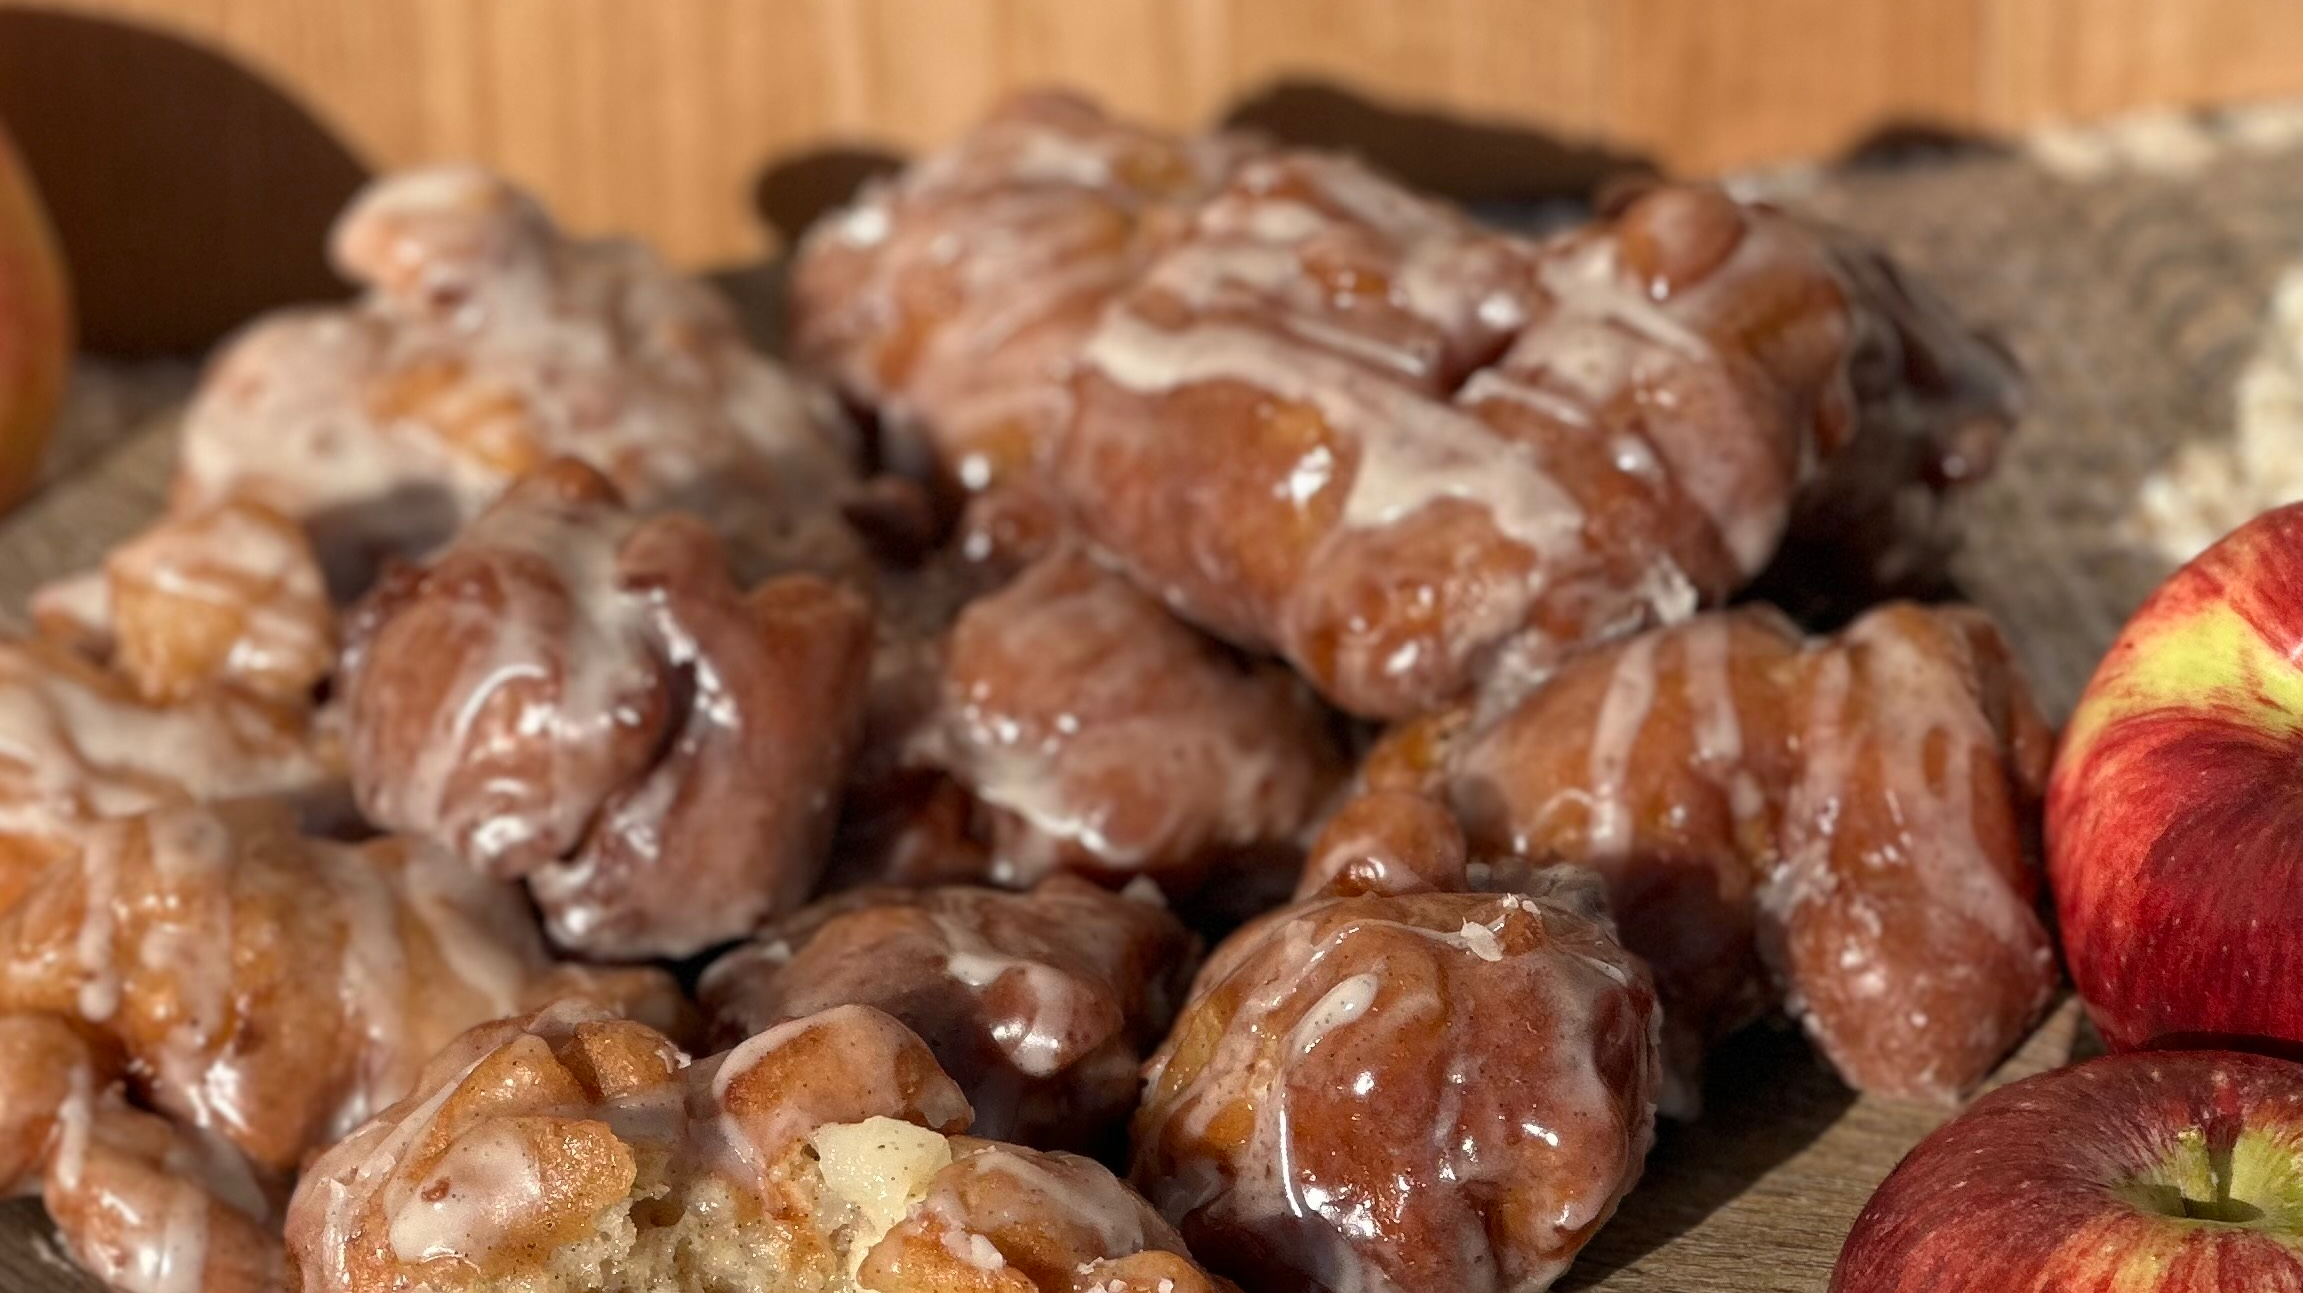 Justin's Apple Fritters